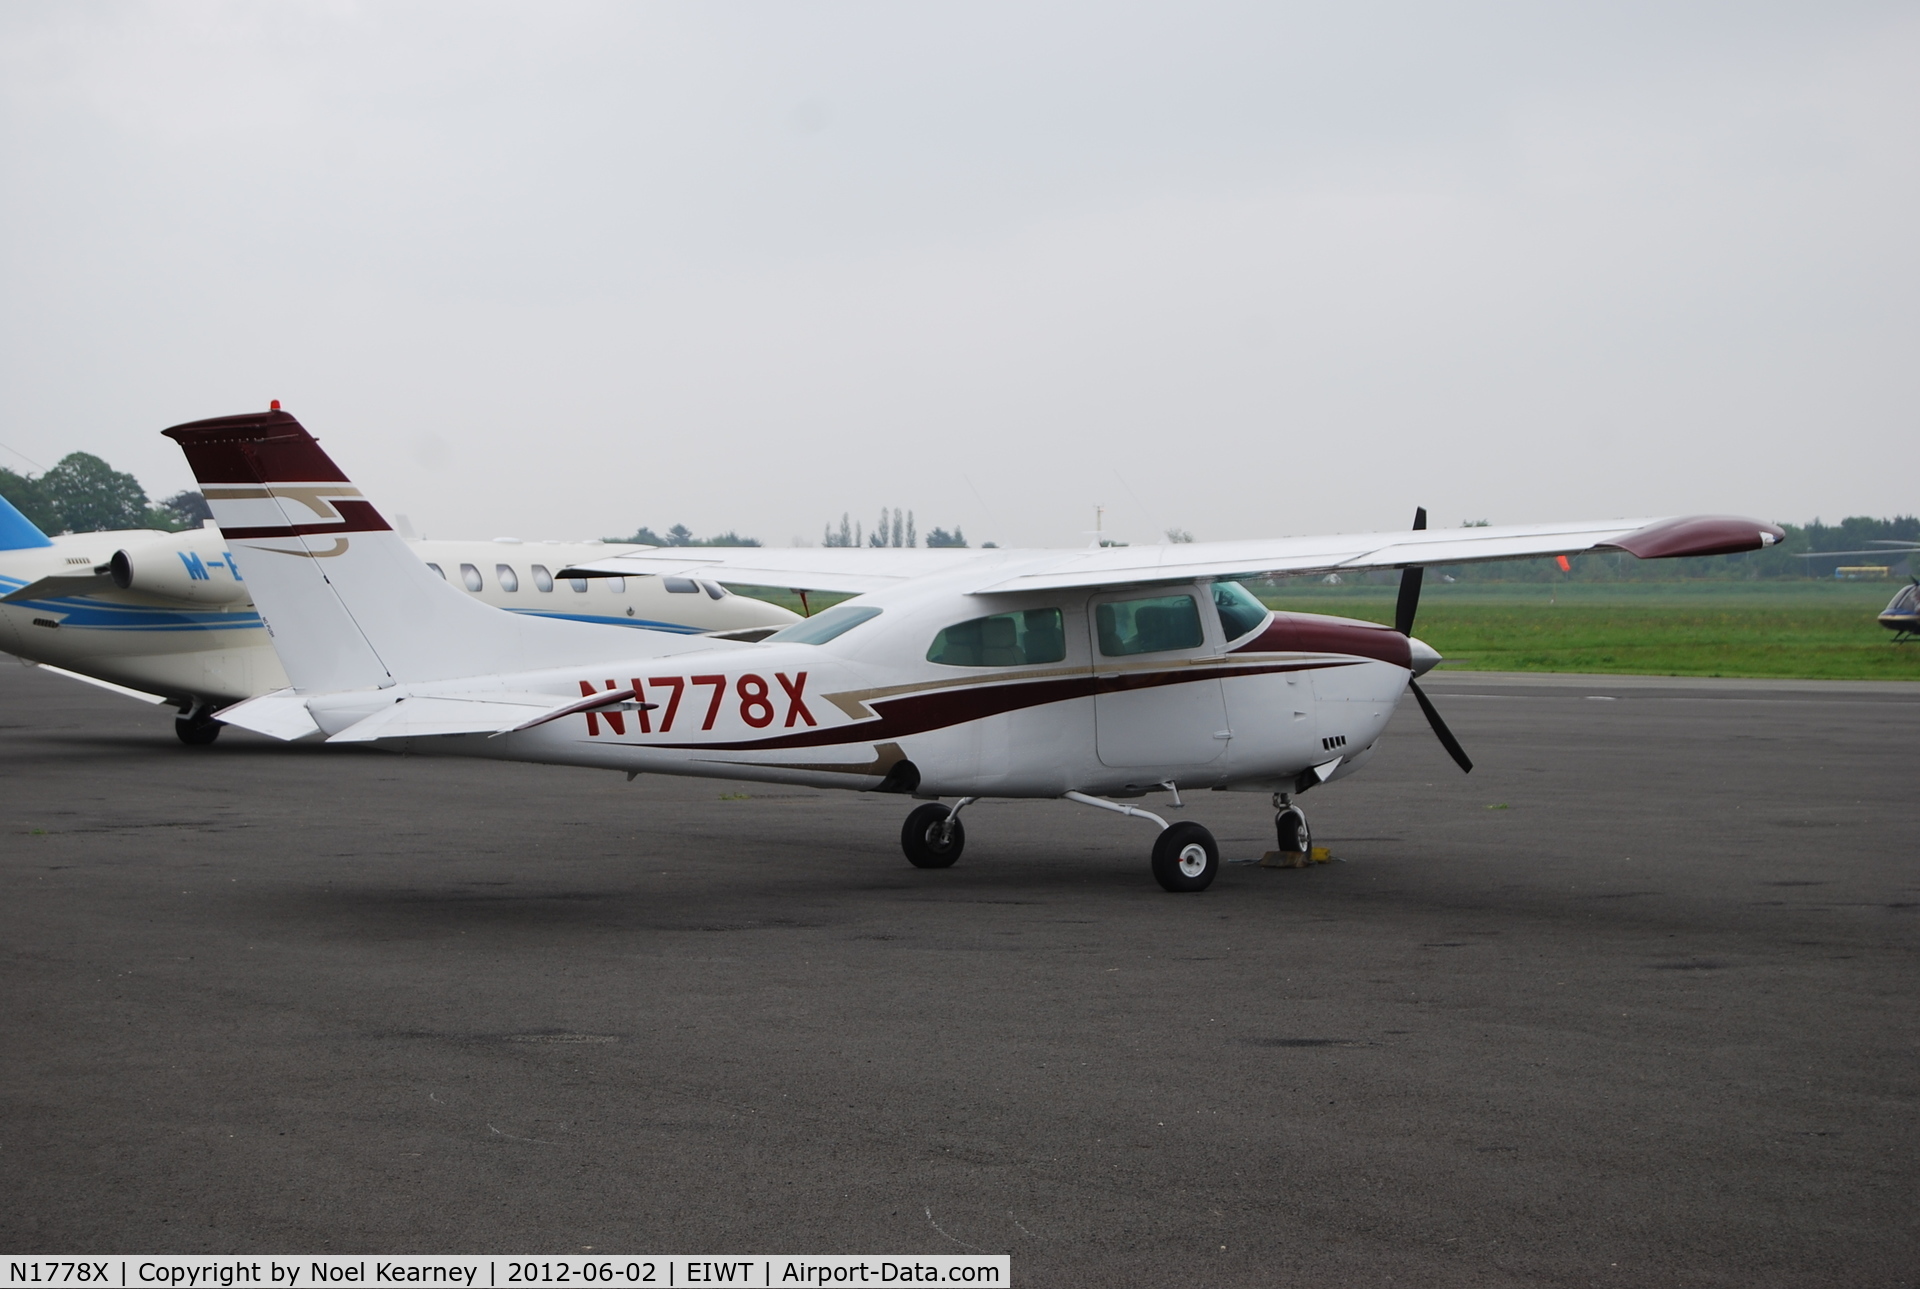 N1778X, 1975 Cessna 210L Centurion C/N 21060798, Seen parked on the apron at Weston.